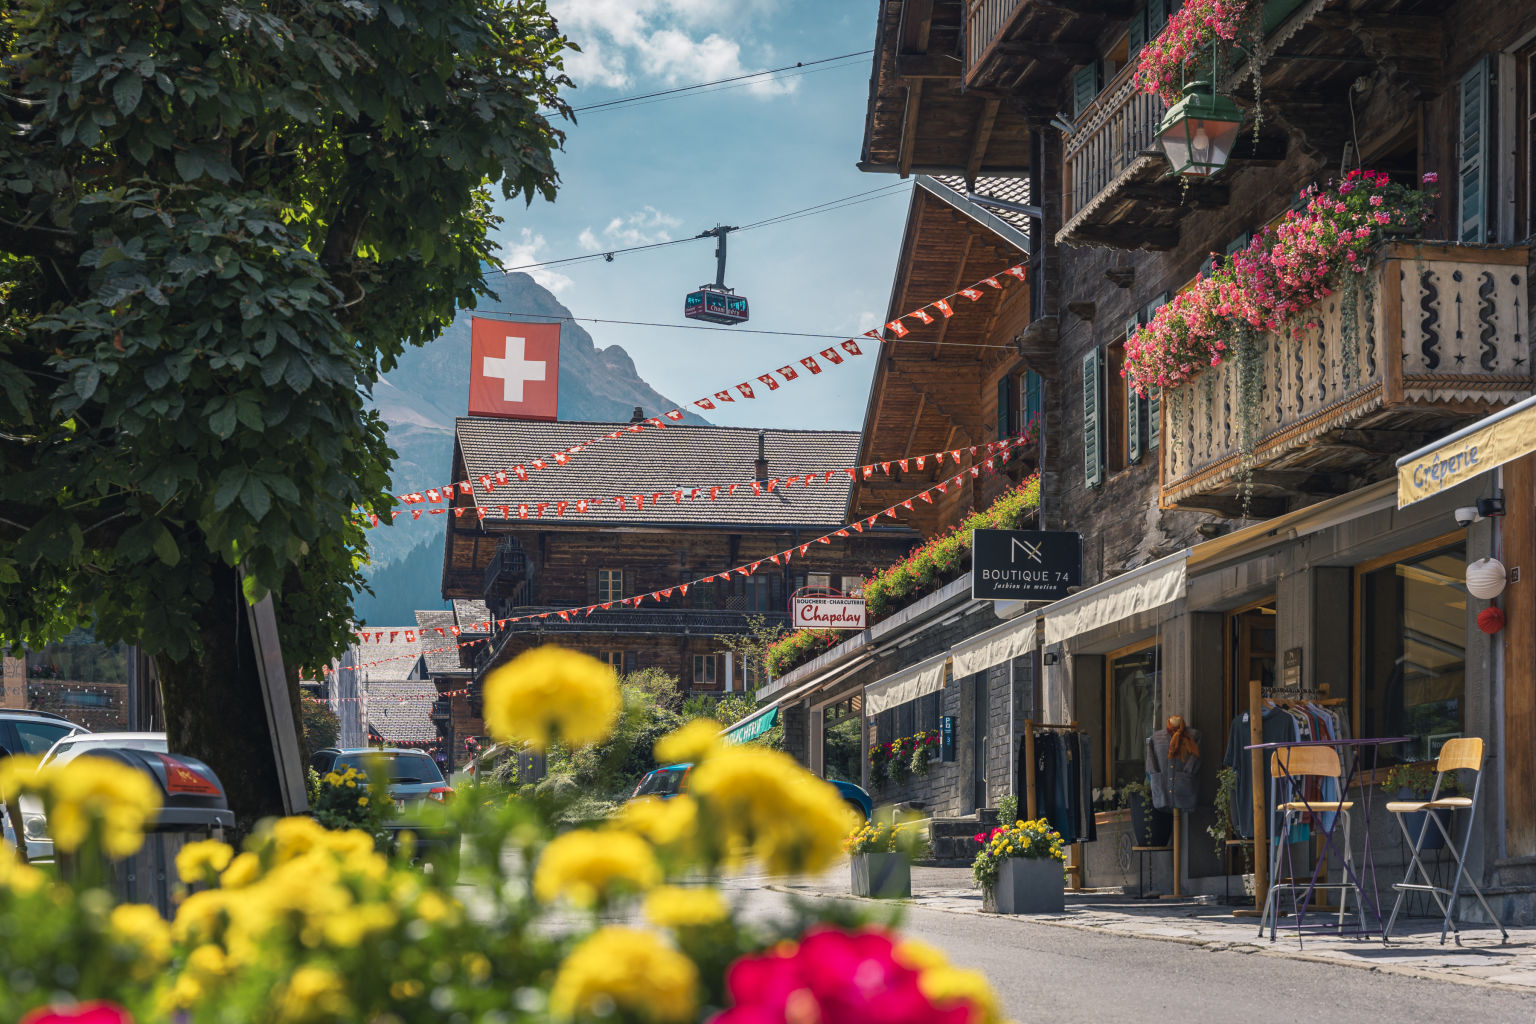 The magnificent village of Champery with its flowers, chalets and ski lifts in the background. Valais, Switzerland.